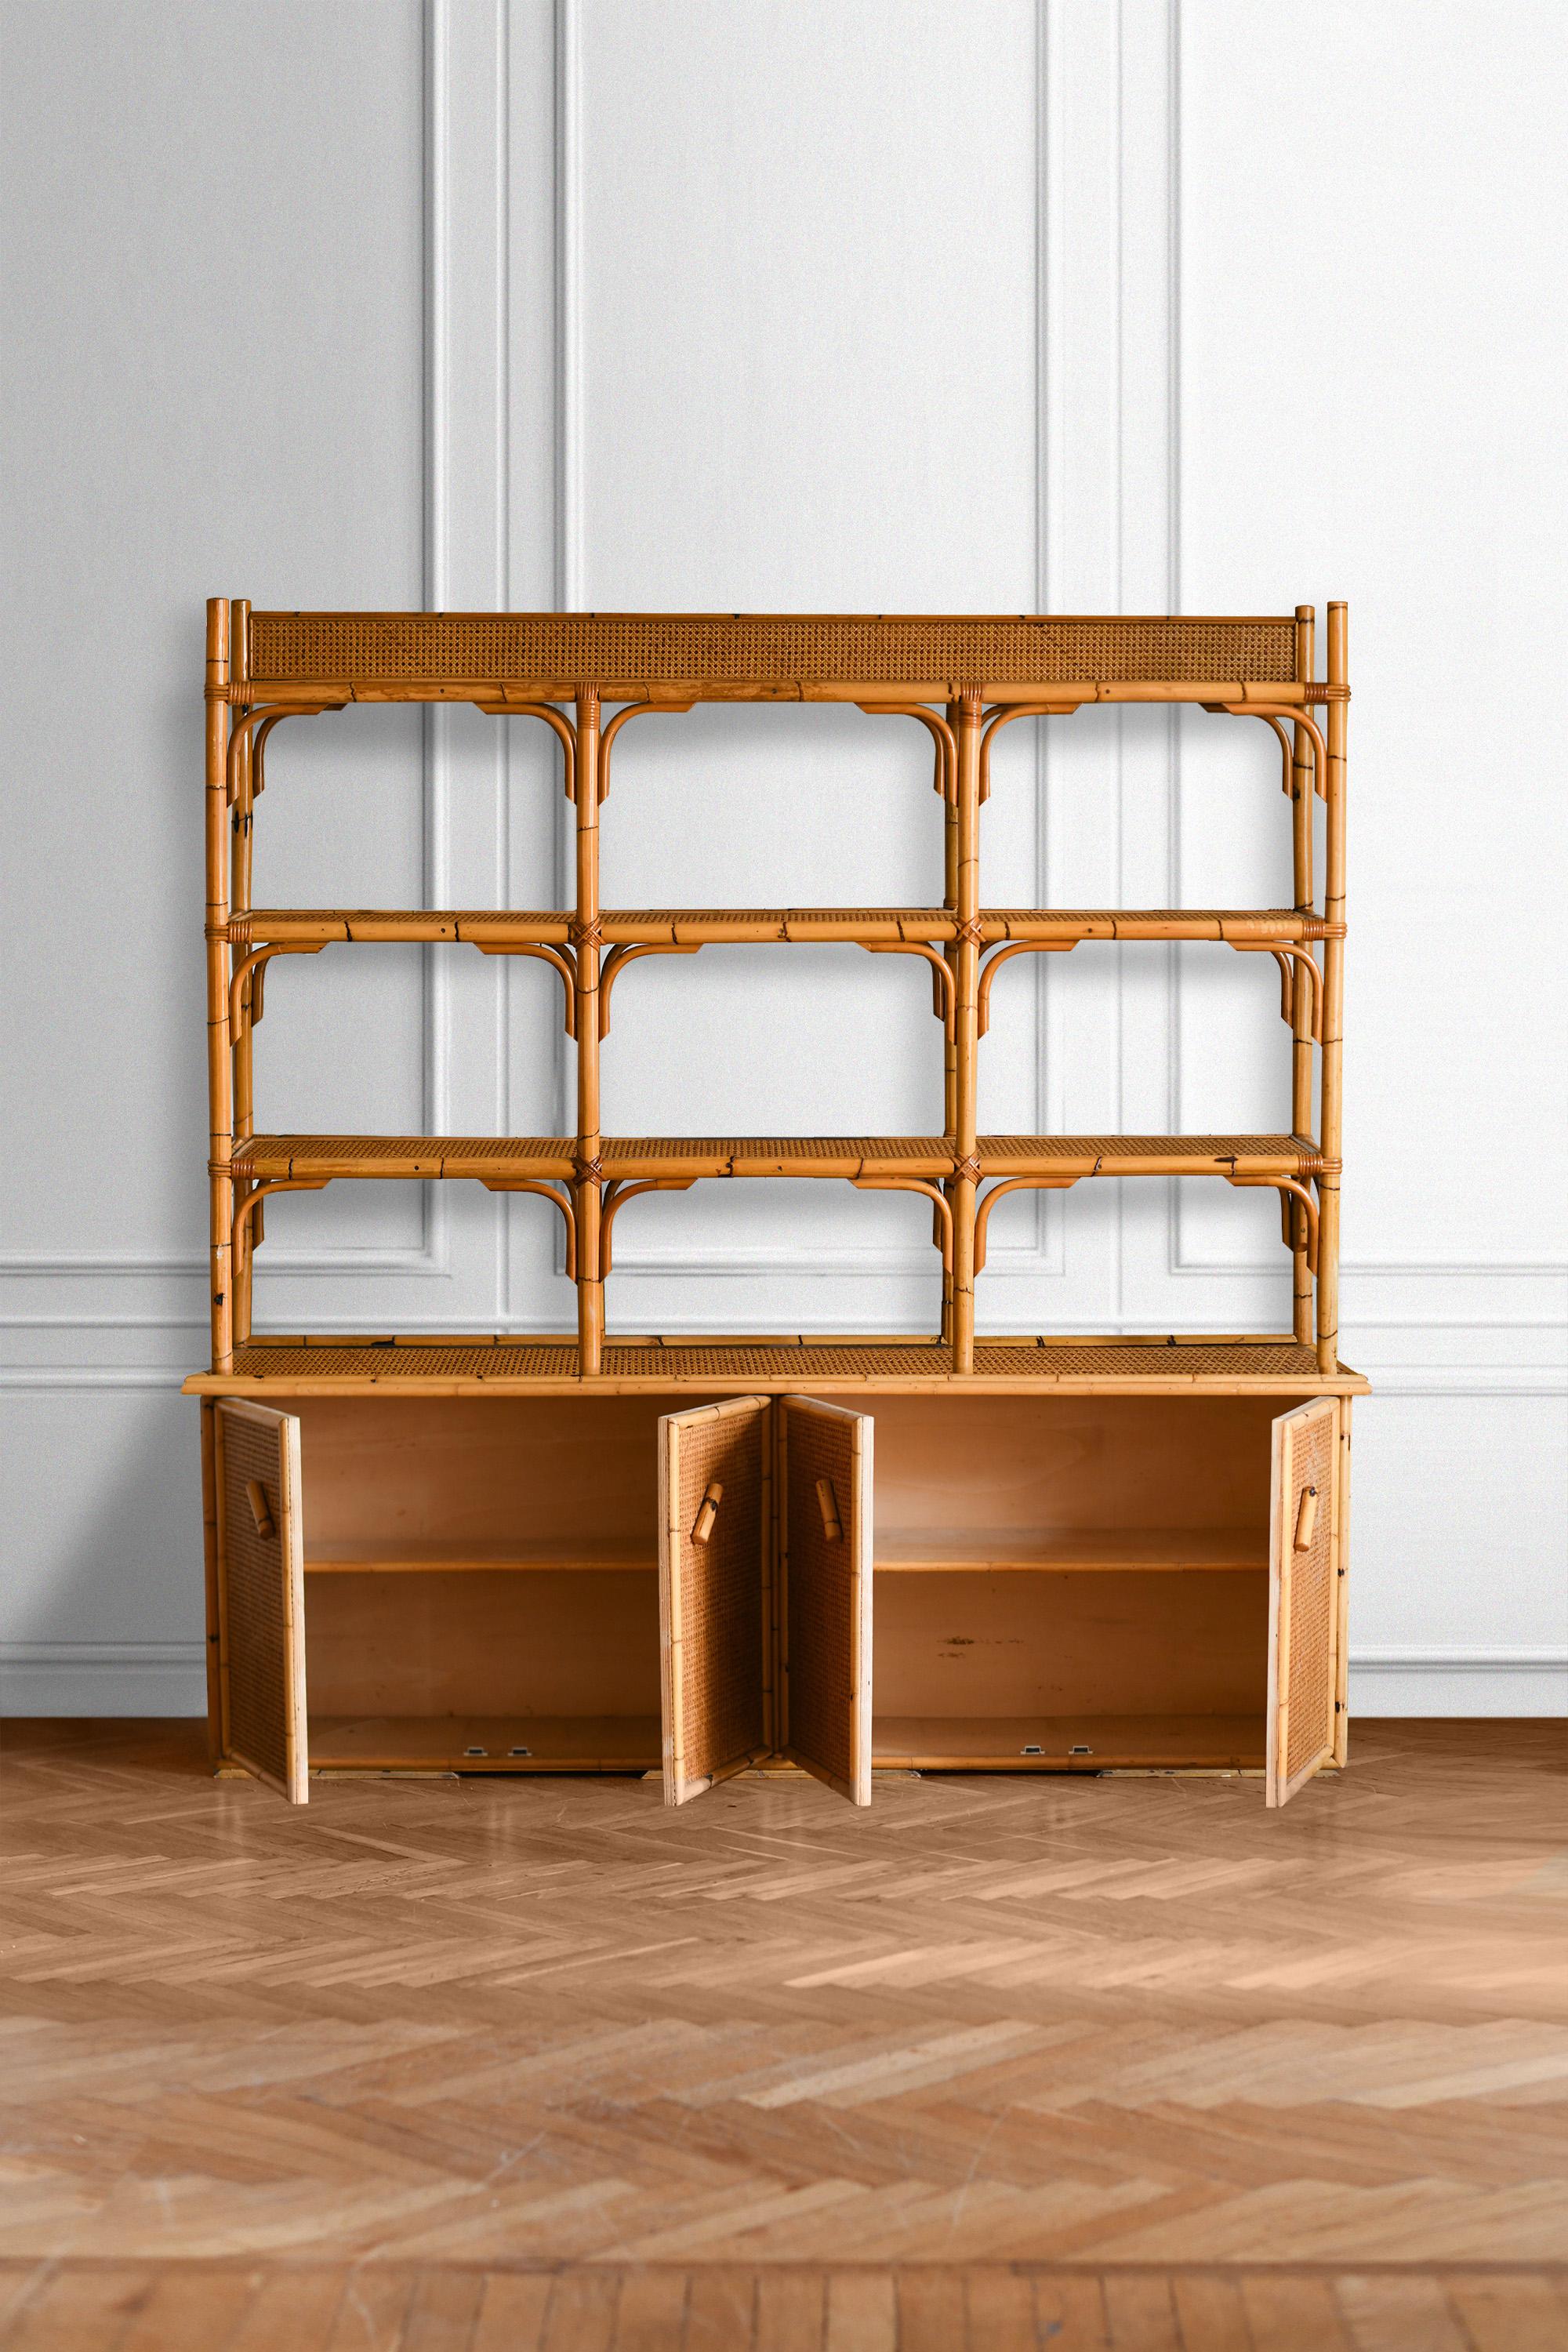 Large sideboard in rush, wicker and Vienna straw.
Storage unit with shelves, doors and internal shelves.
Dimensions: 220 W x 220 H x 48 D cm. Space between shelves 40 H cm
Italian production, 1980s